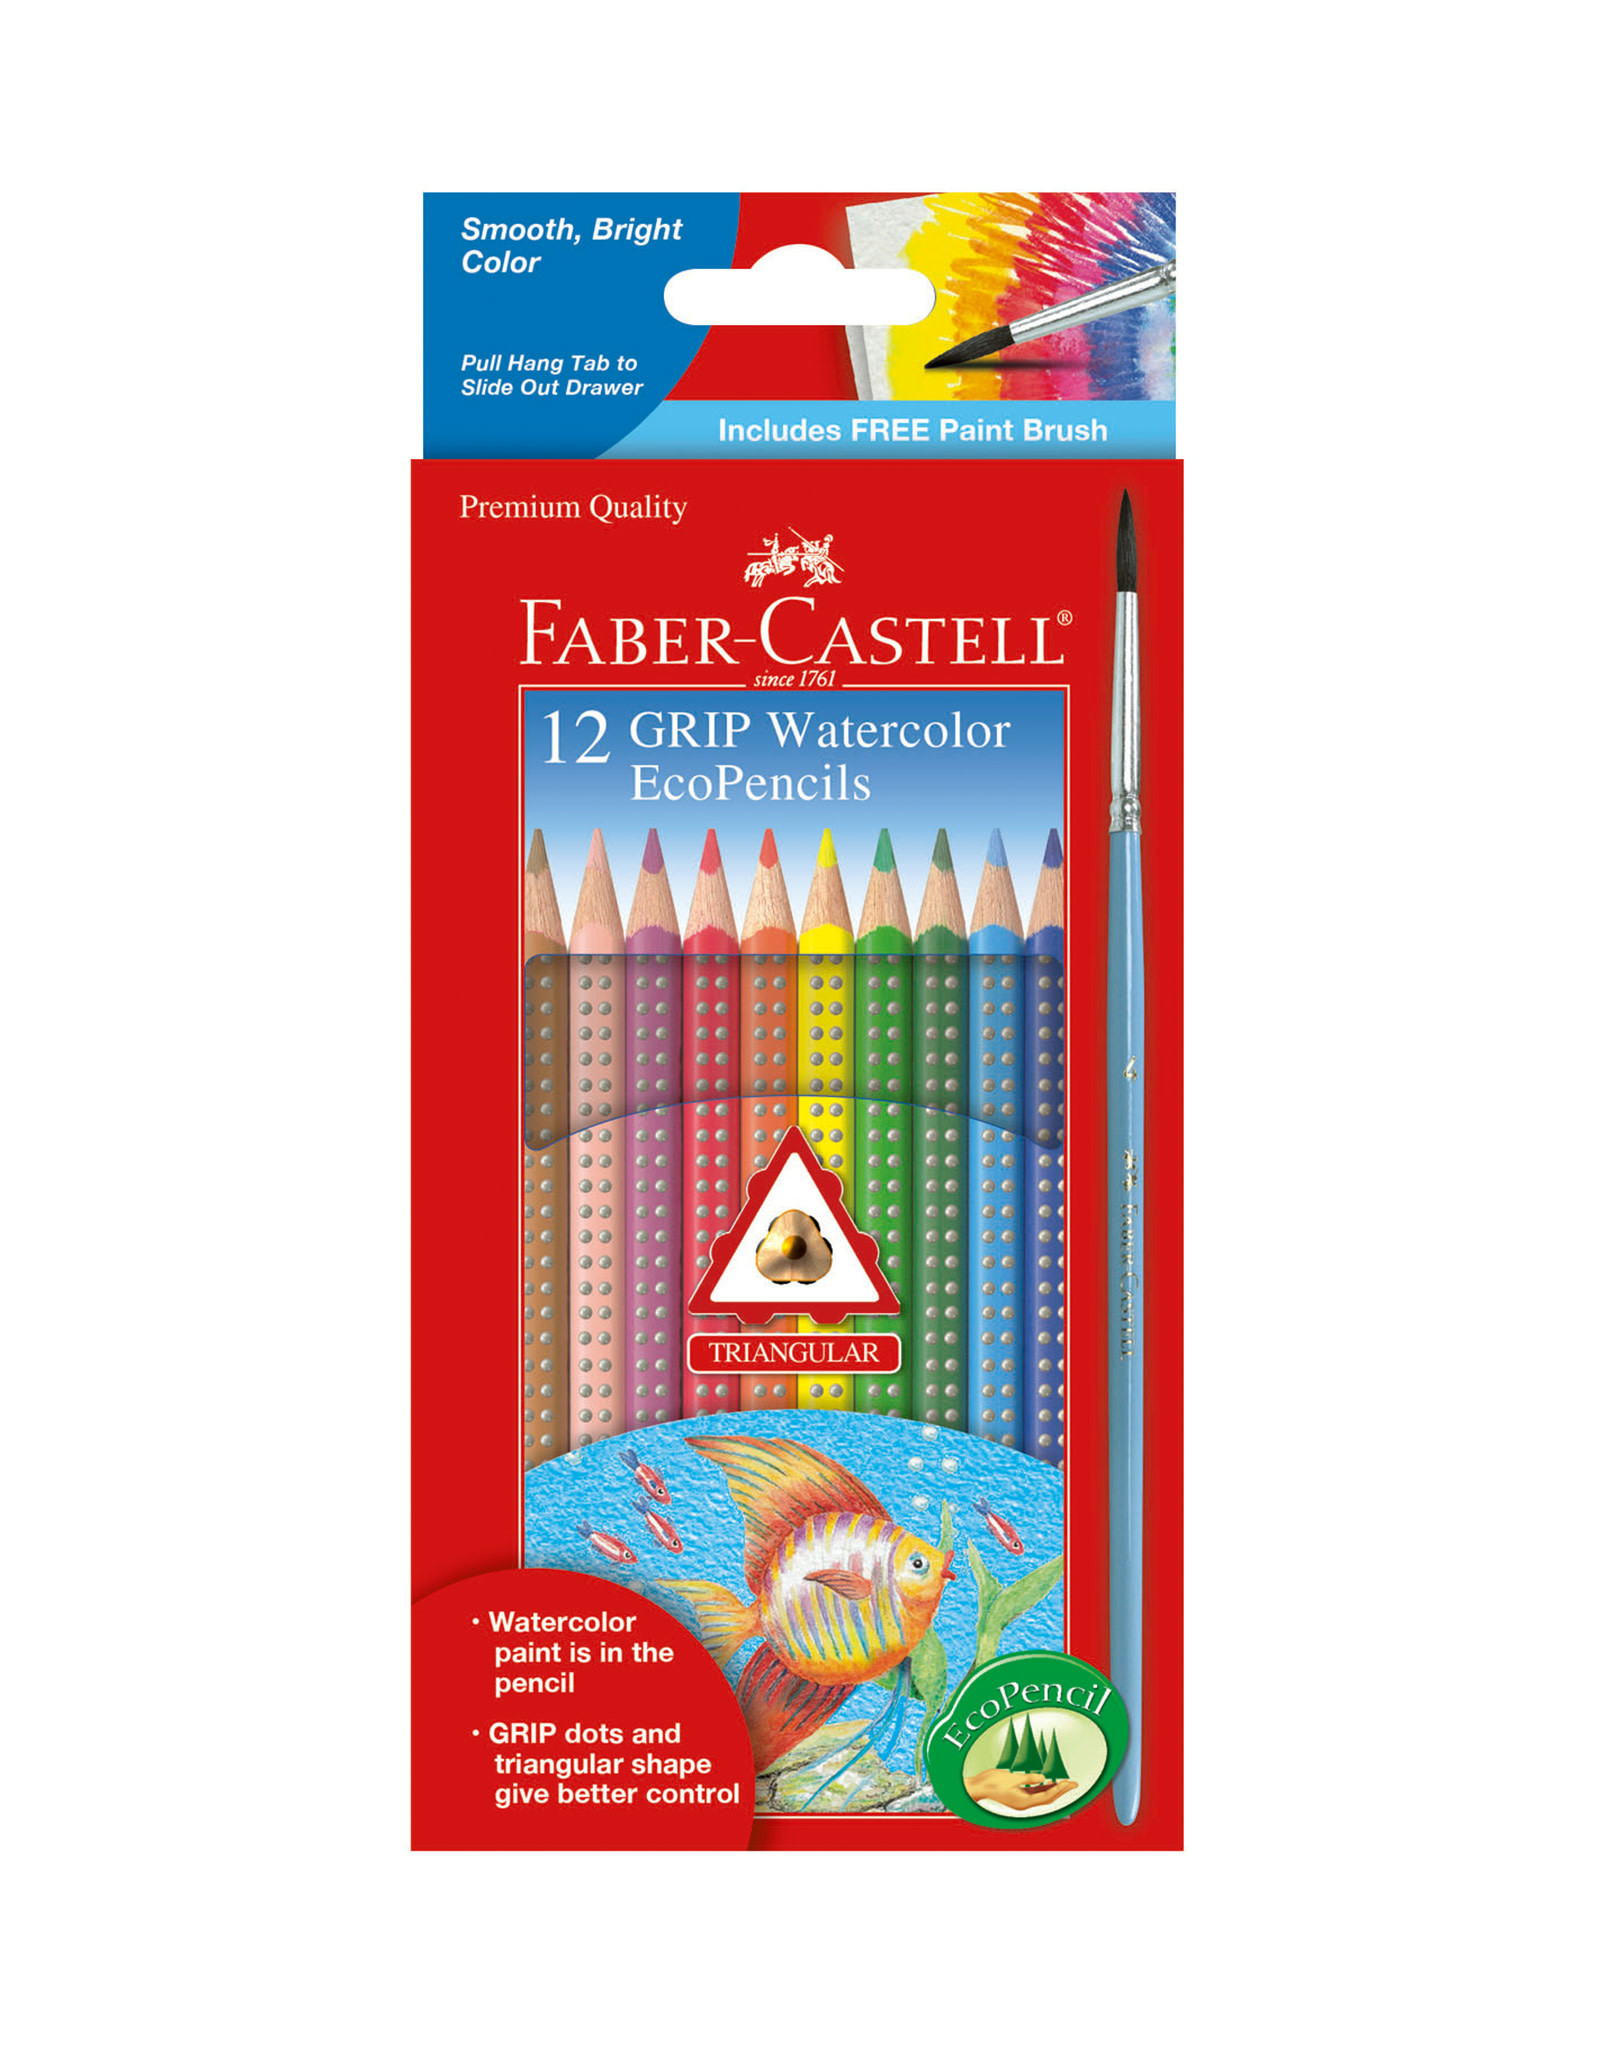 FABER-CASTELL Faber-Castell Grip Watercolor EcoPencils, Set of 12